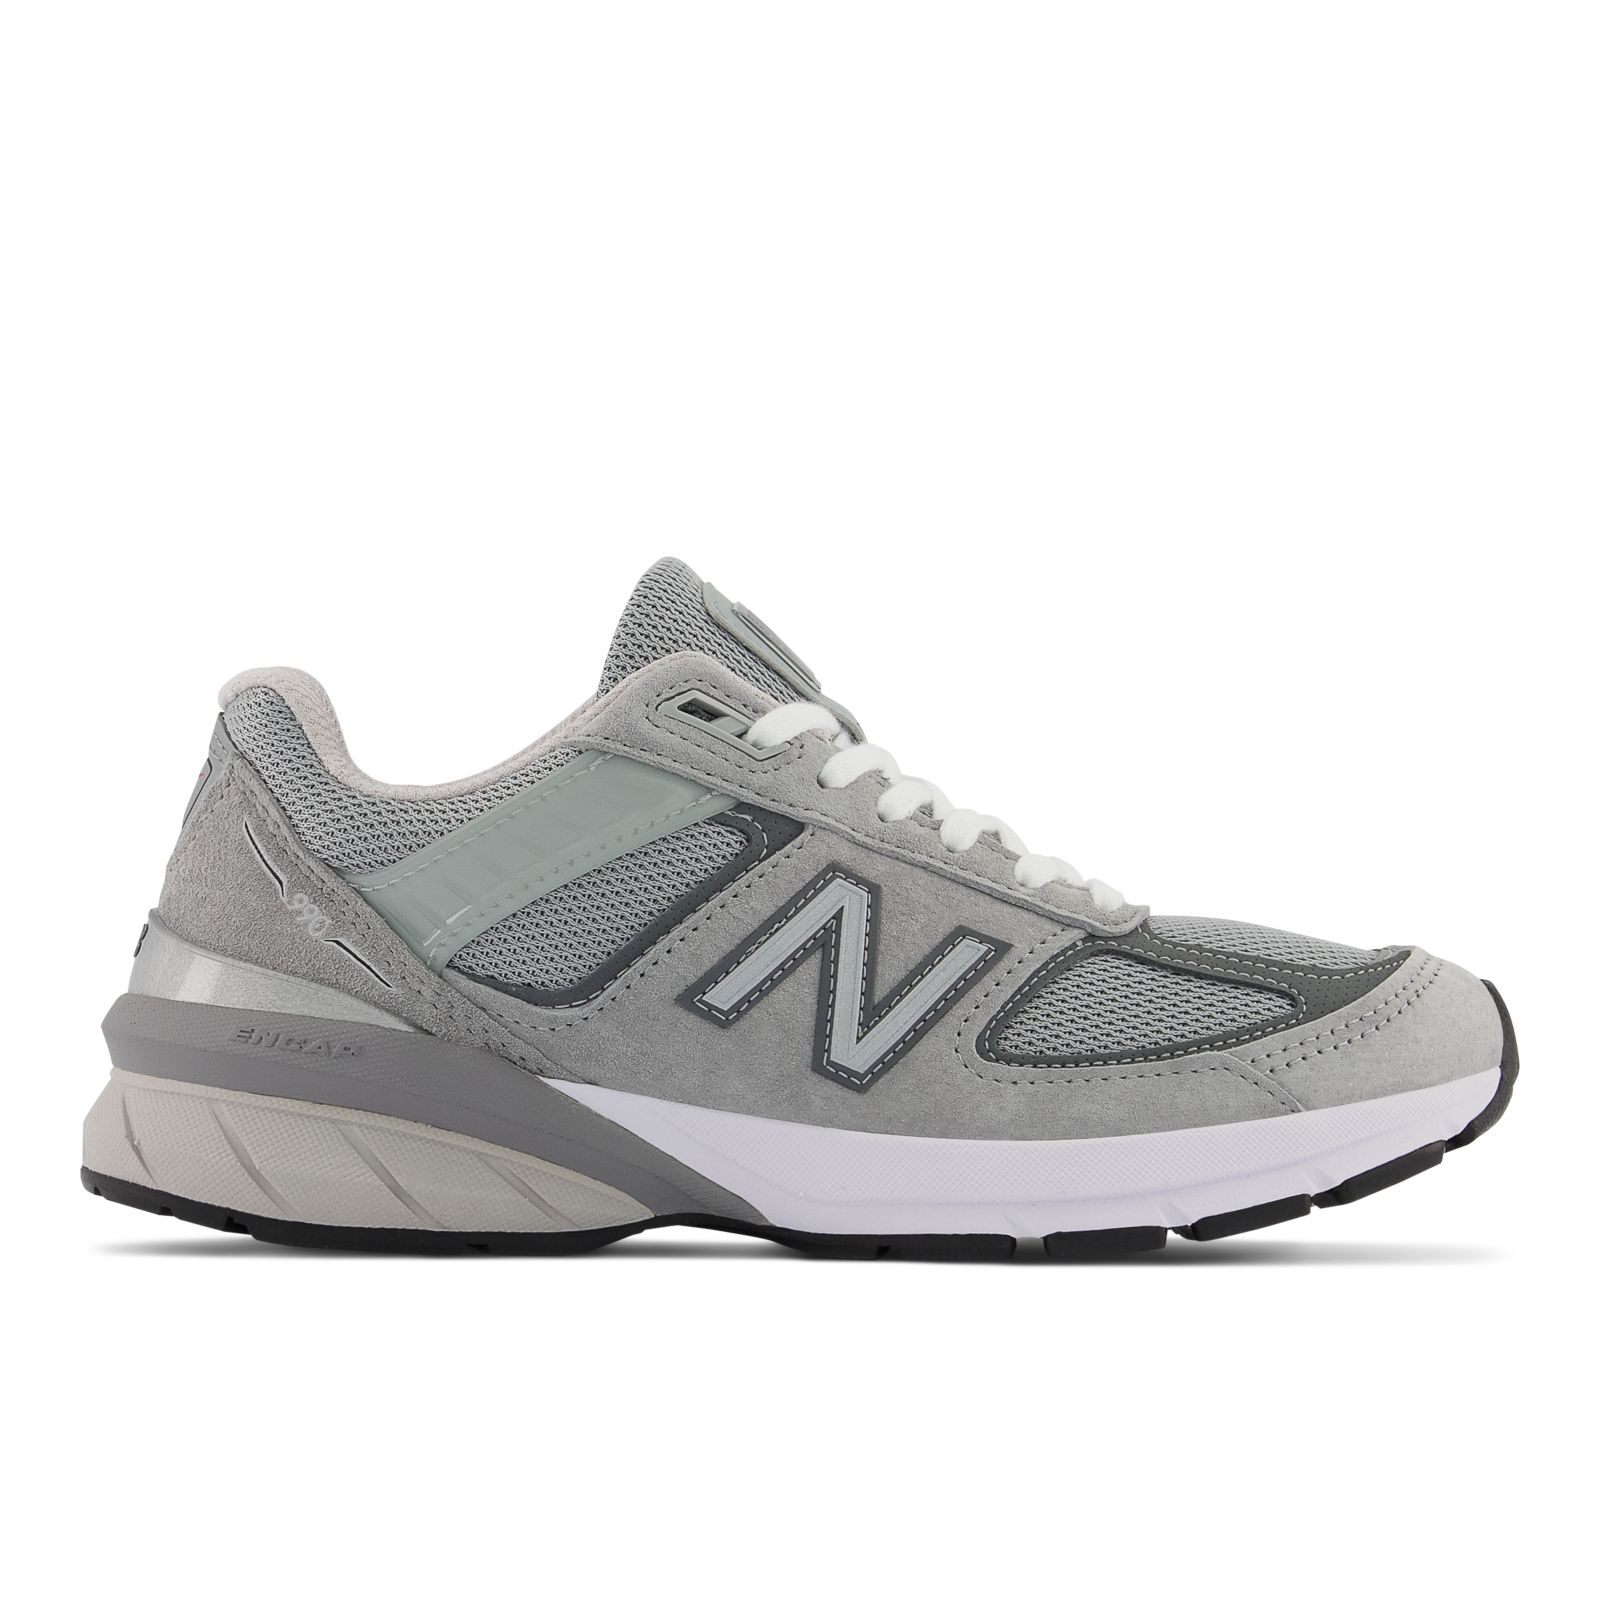 Women's MADE in USA 990v5 Core - New Balance